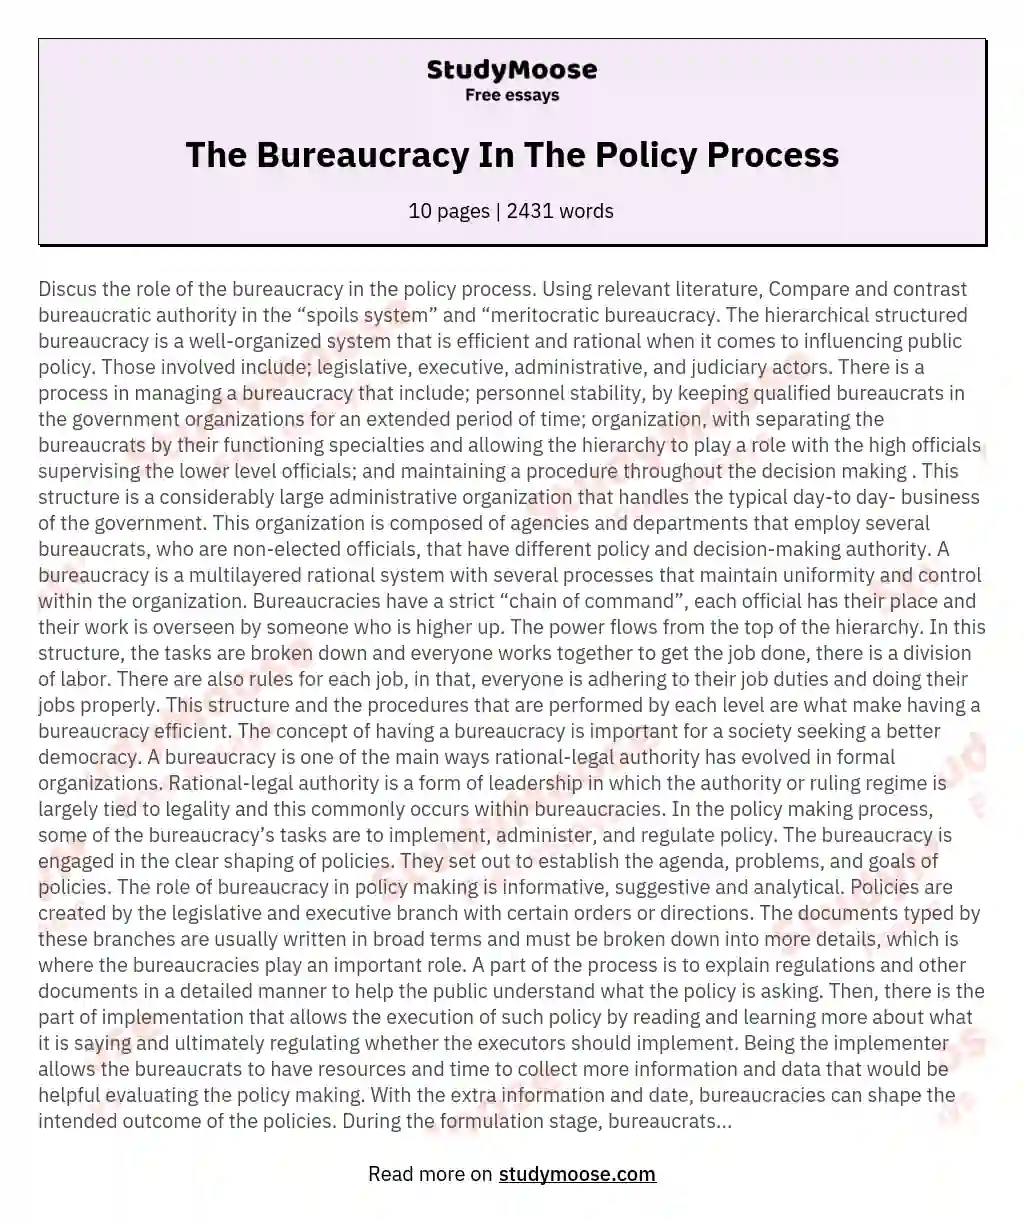 The Bureaucracy In The Policy Process essay